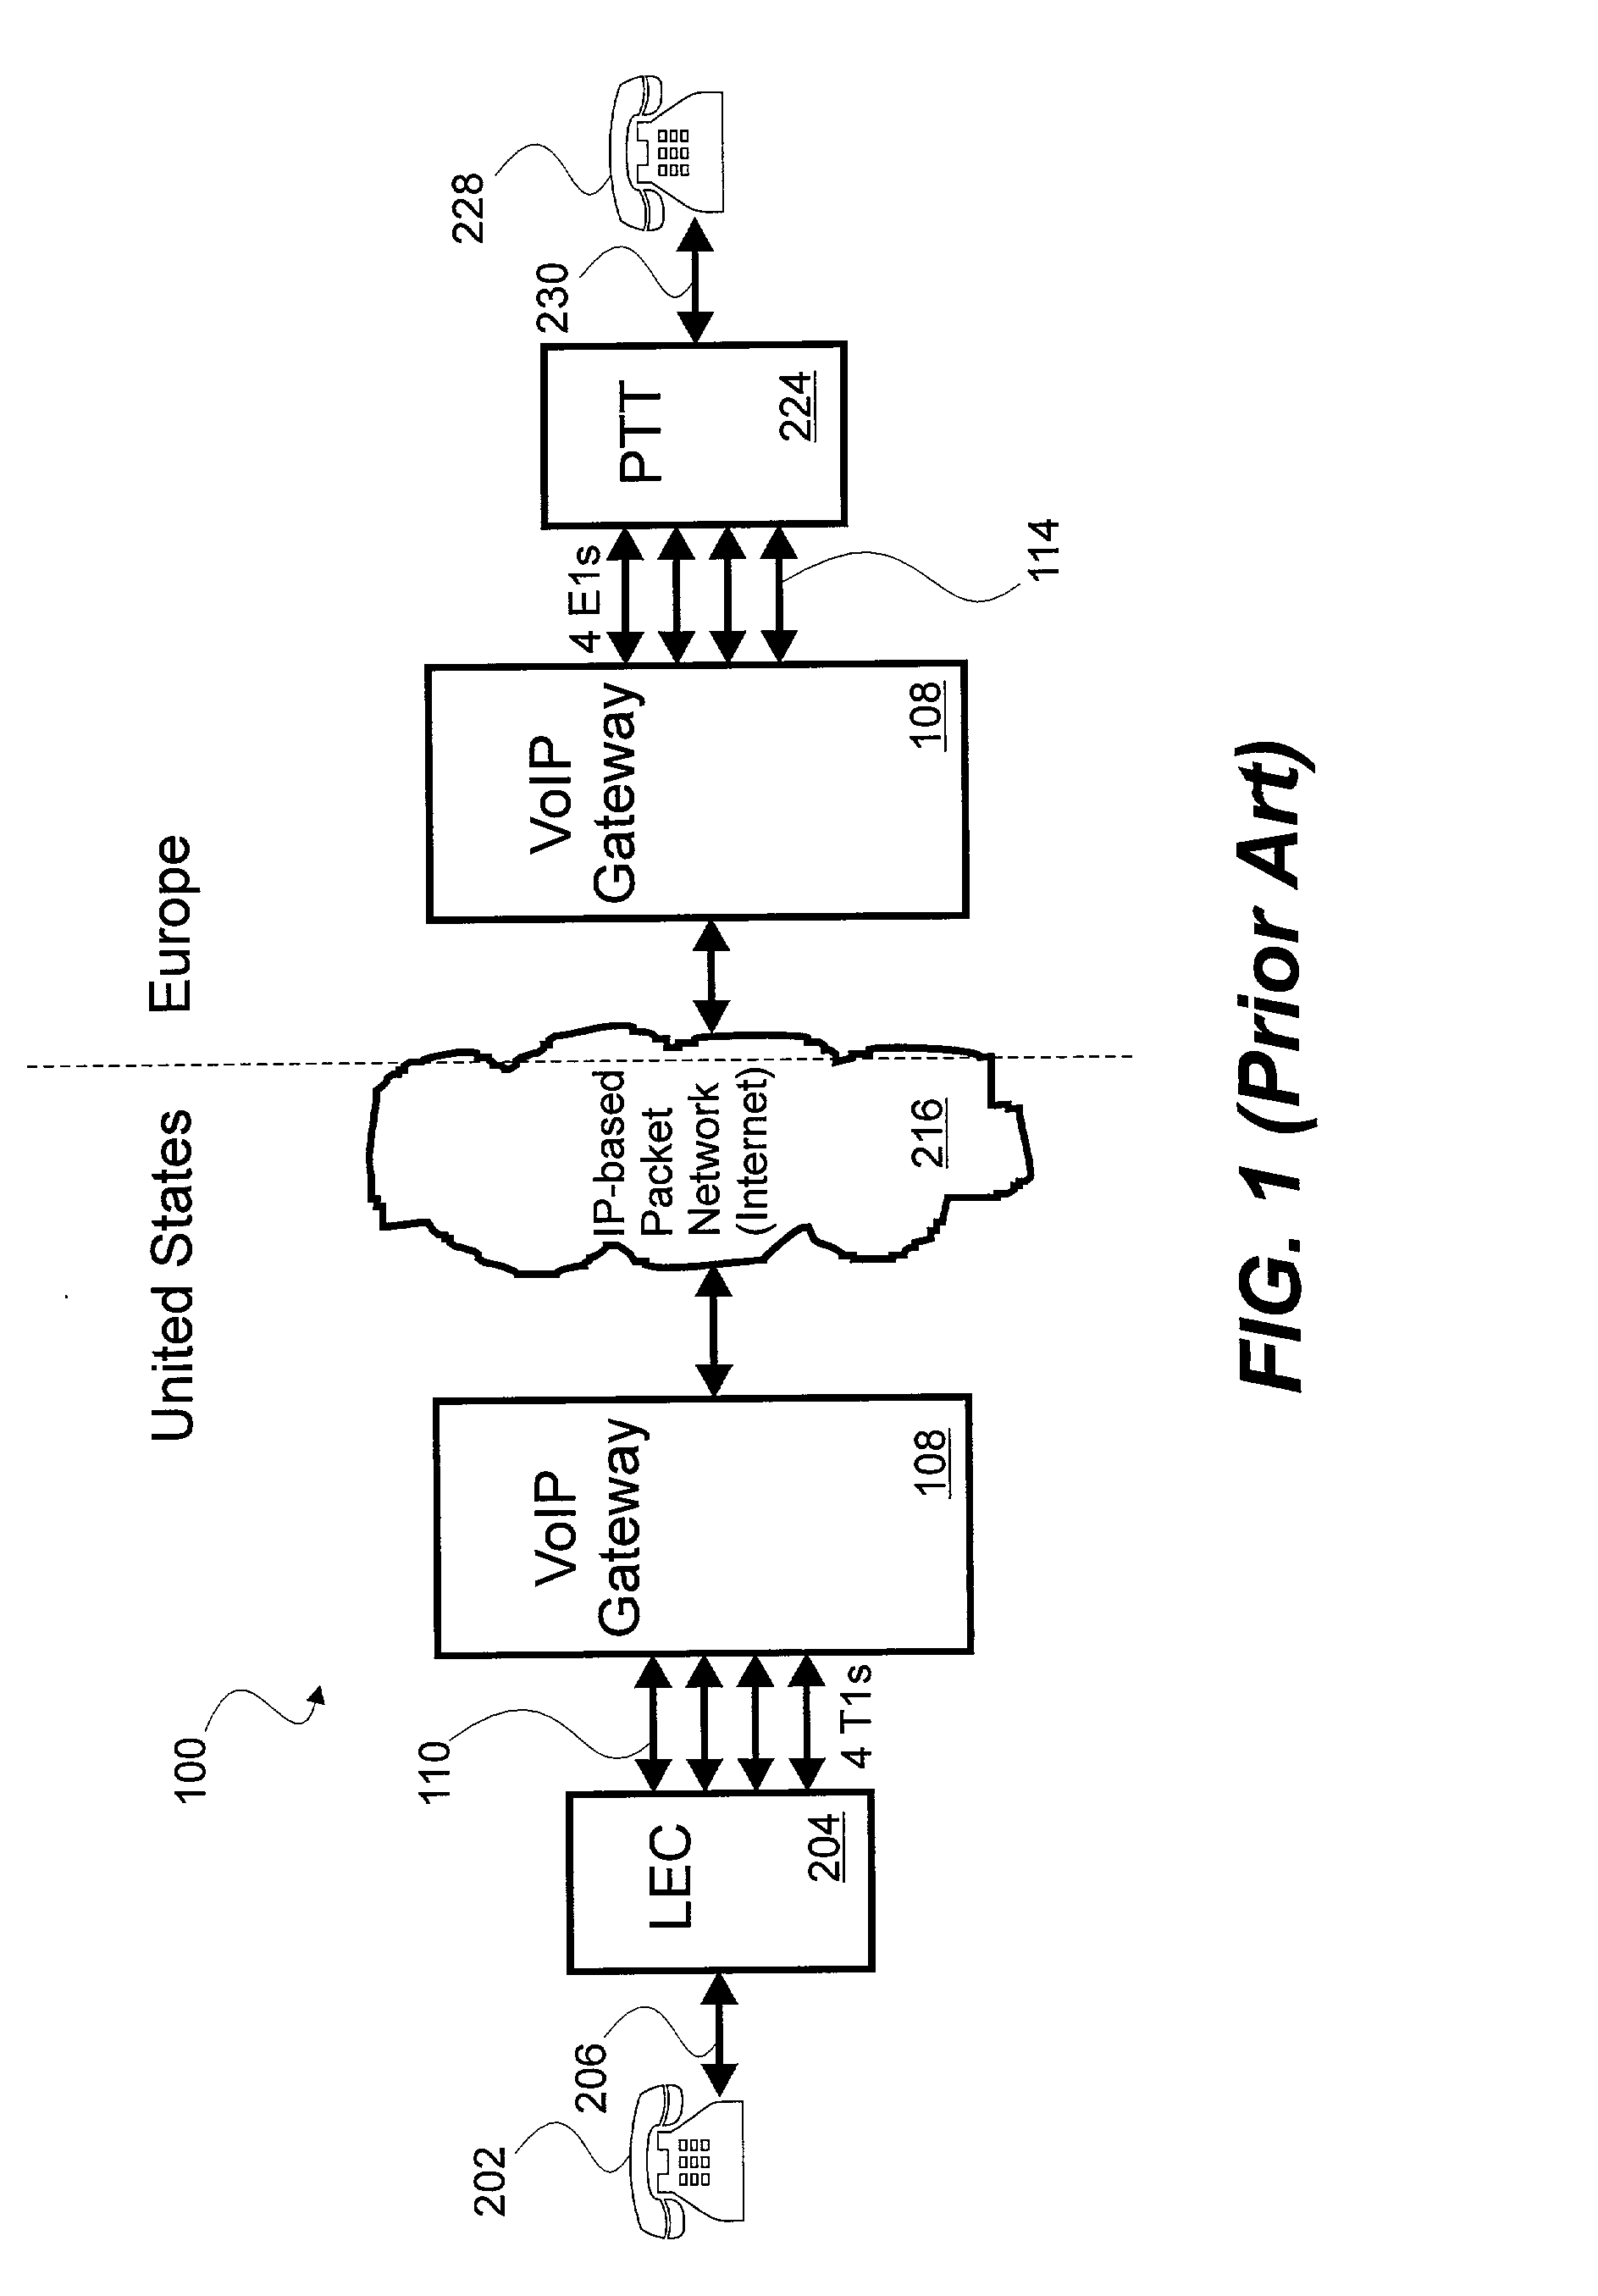 System, apparatus and method for voice over internet protocol telephone calling using enhanced signaling packets and localized time slot interchanging